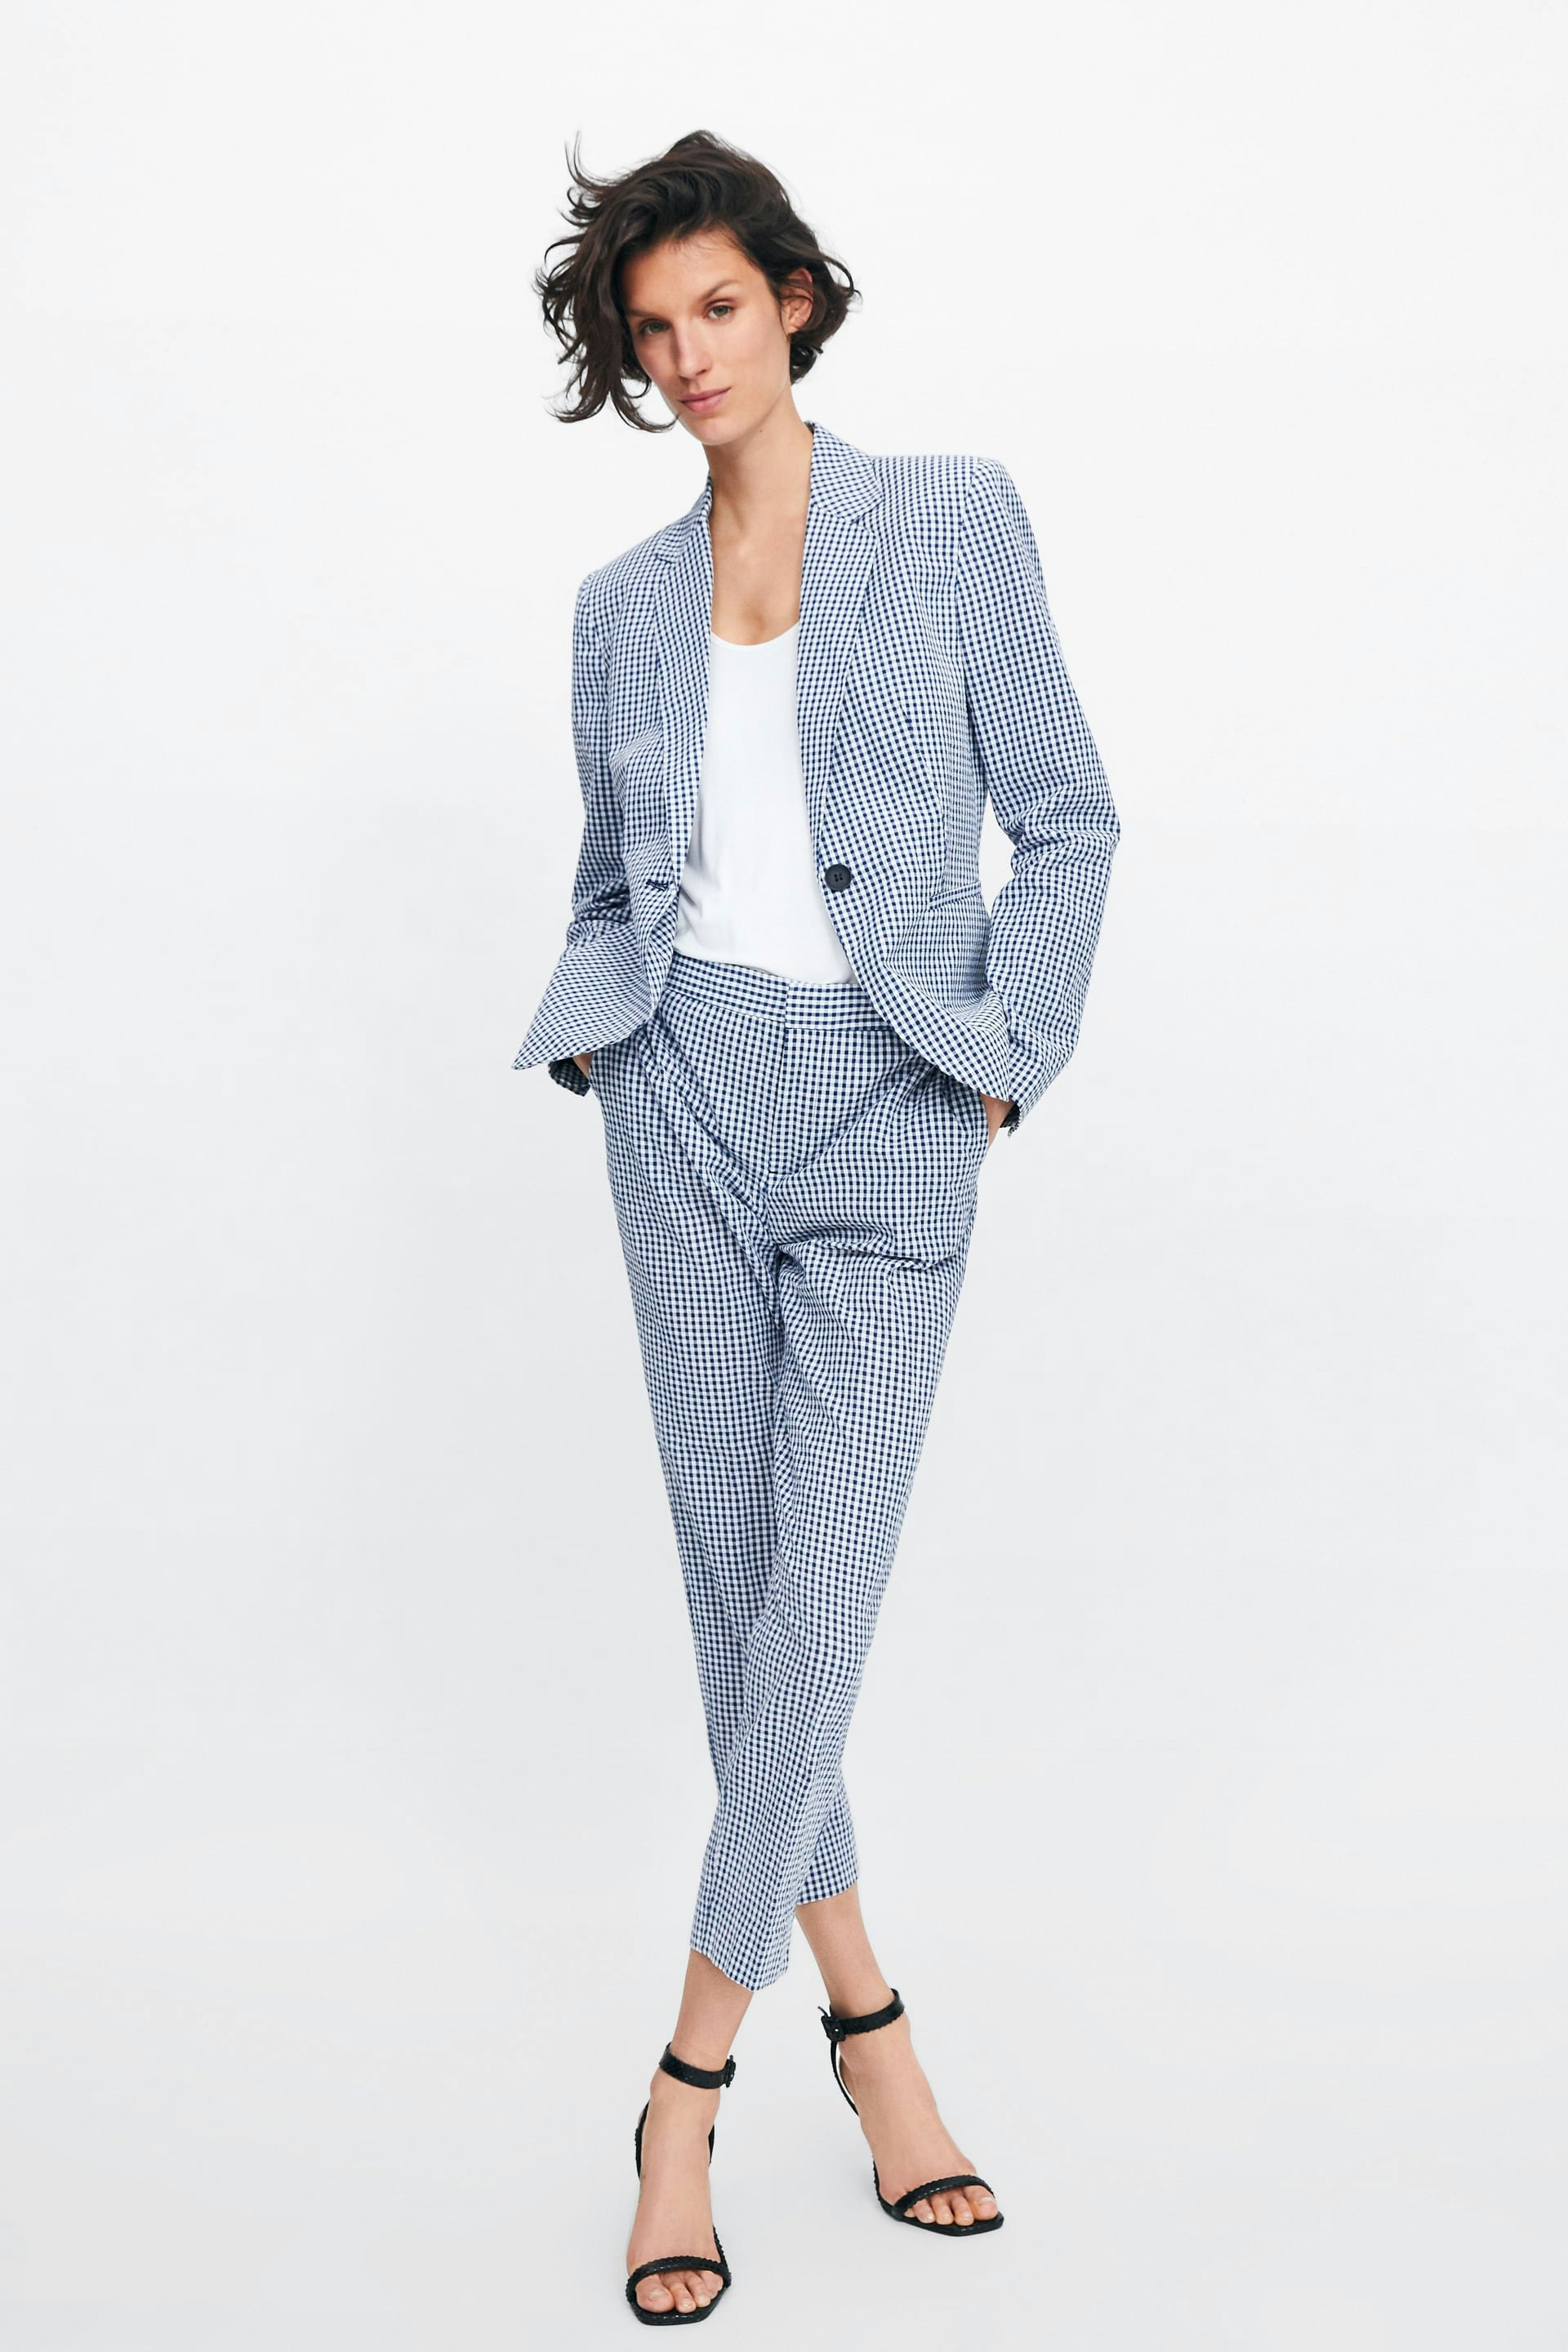 pants outfits to wear to a wedding